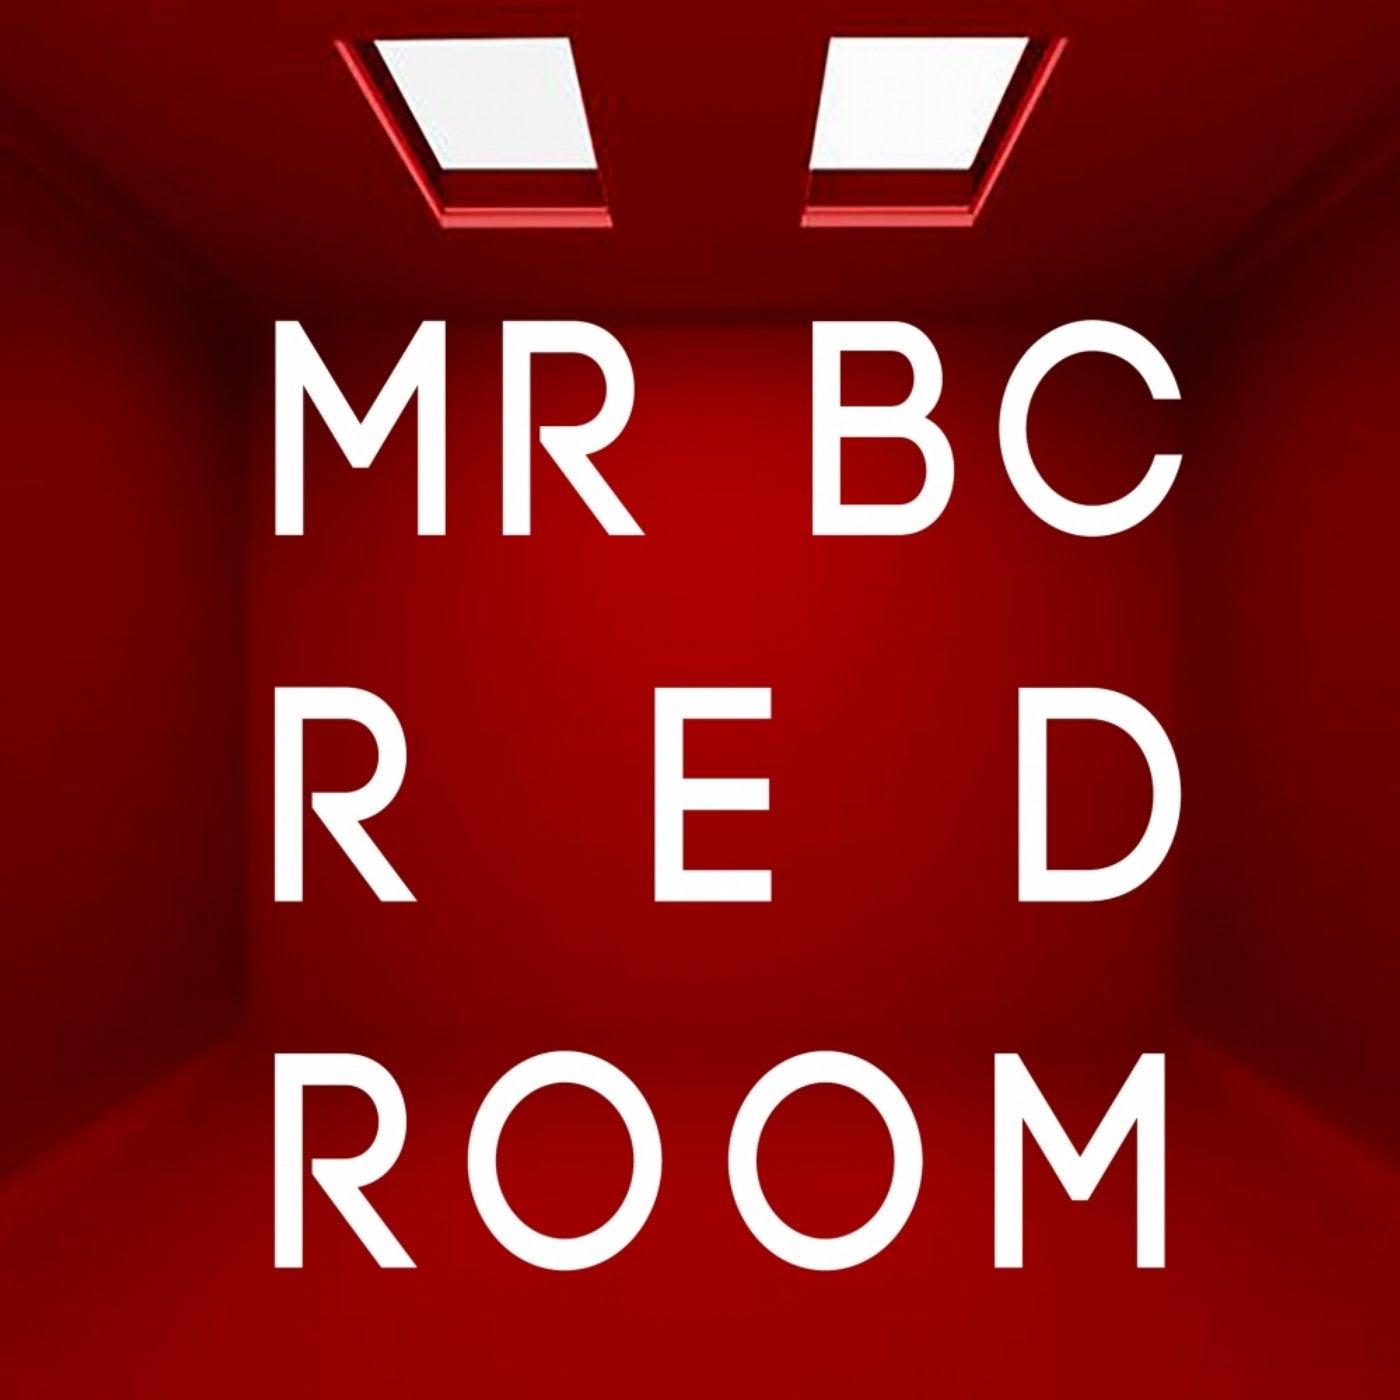 Red Room EP